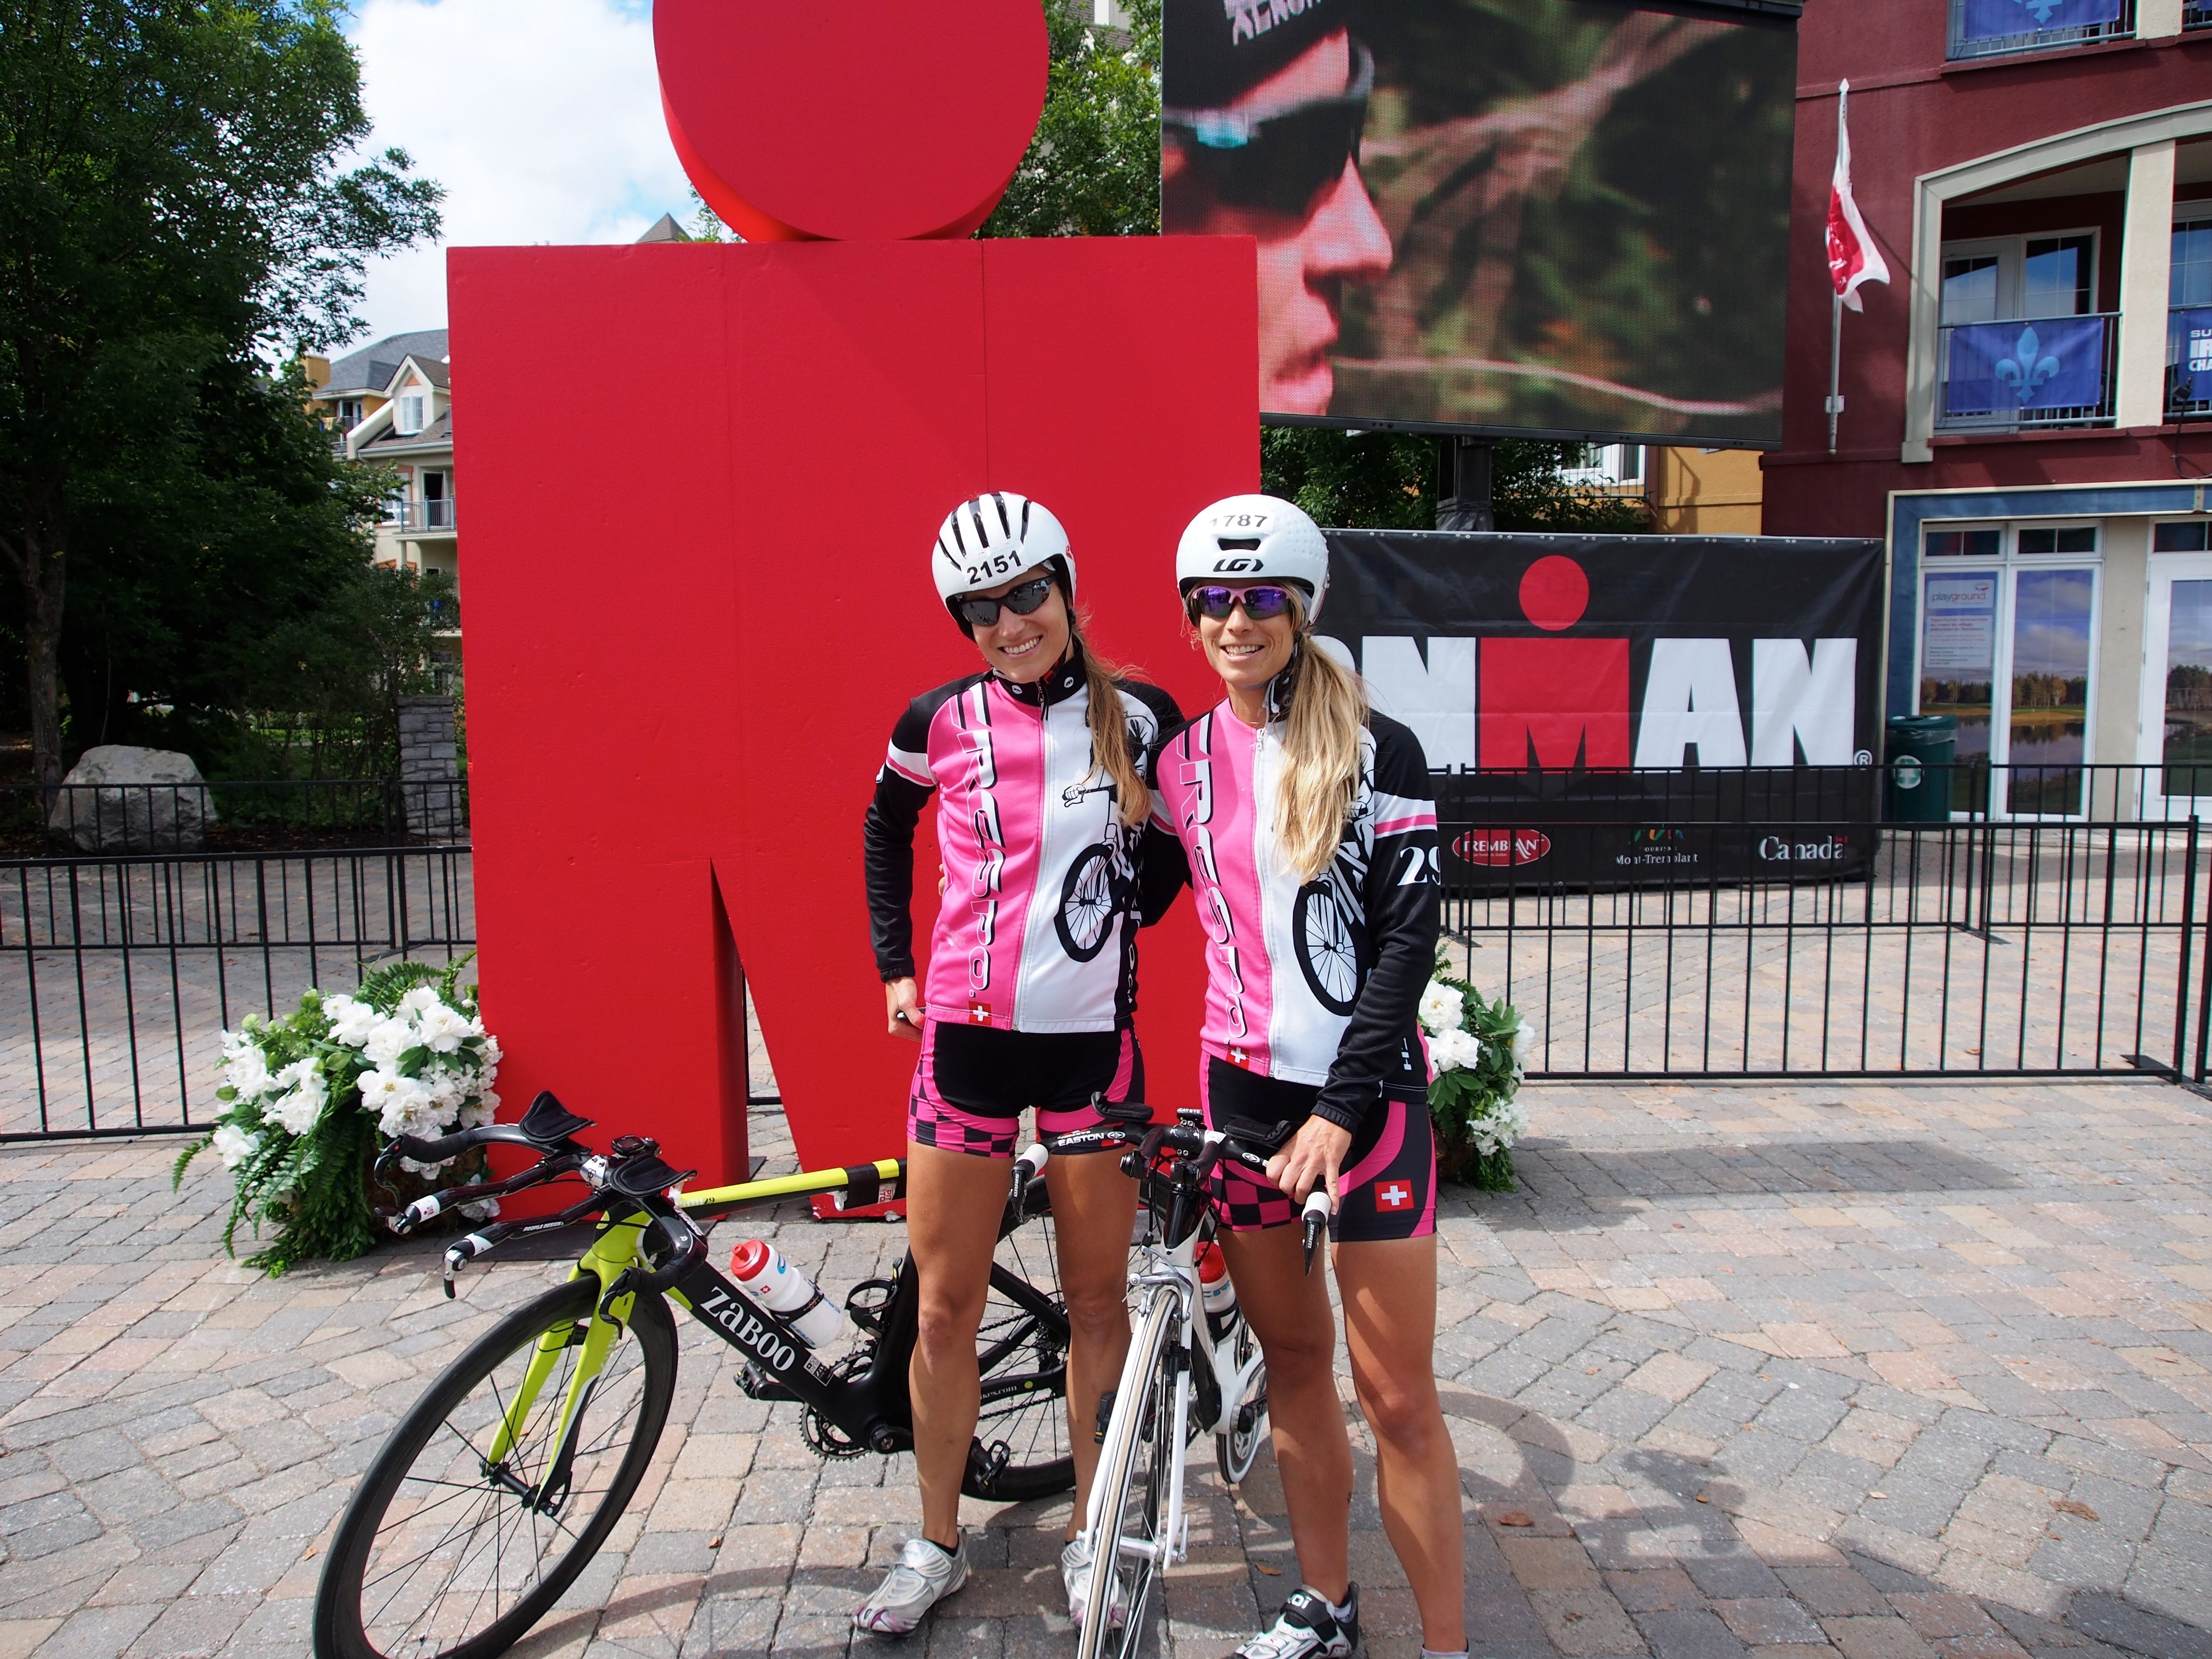 These two swiss Triathlete are very excited to be at the 2014 Ironman World Championship.